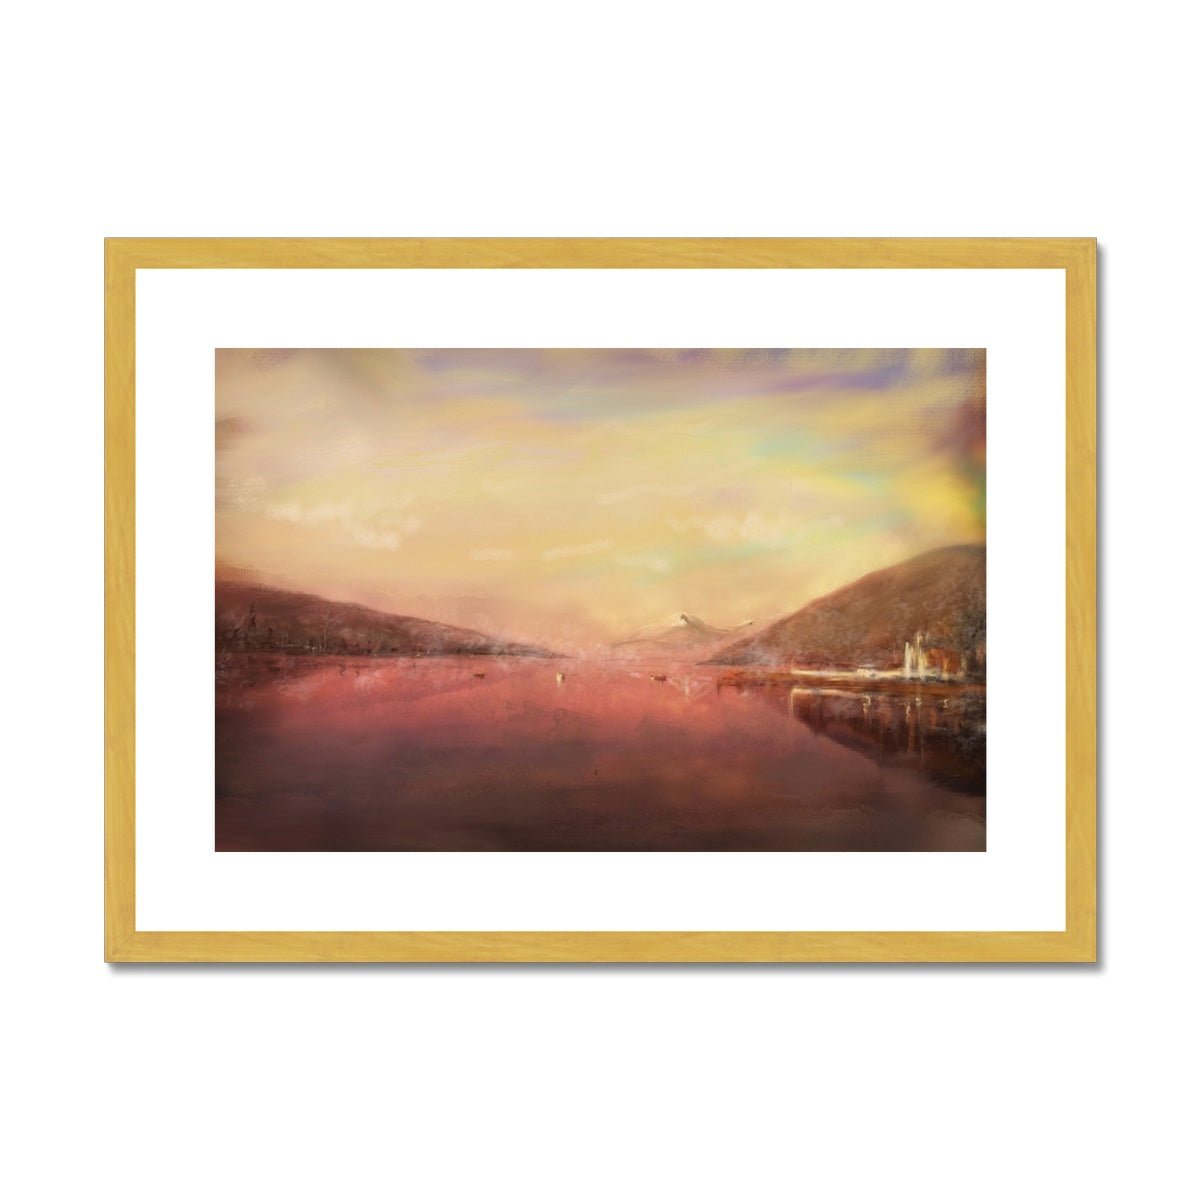 Loch Tay Painting | Antique Framed & Mounted Prints From Scotland-Antique Framed & Mounted Prints-Scottish Lochs & Mountains Art Gallery-A2 Landscape-Gold Frame-Paintings, Prints, Homeware, Art Gifts From Scotland By Scottish Artist Kevin Hunter